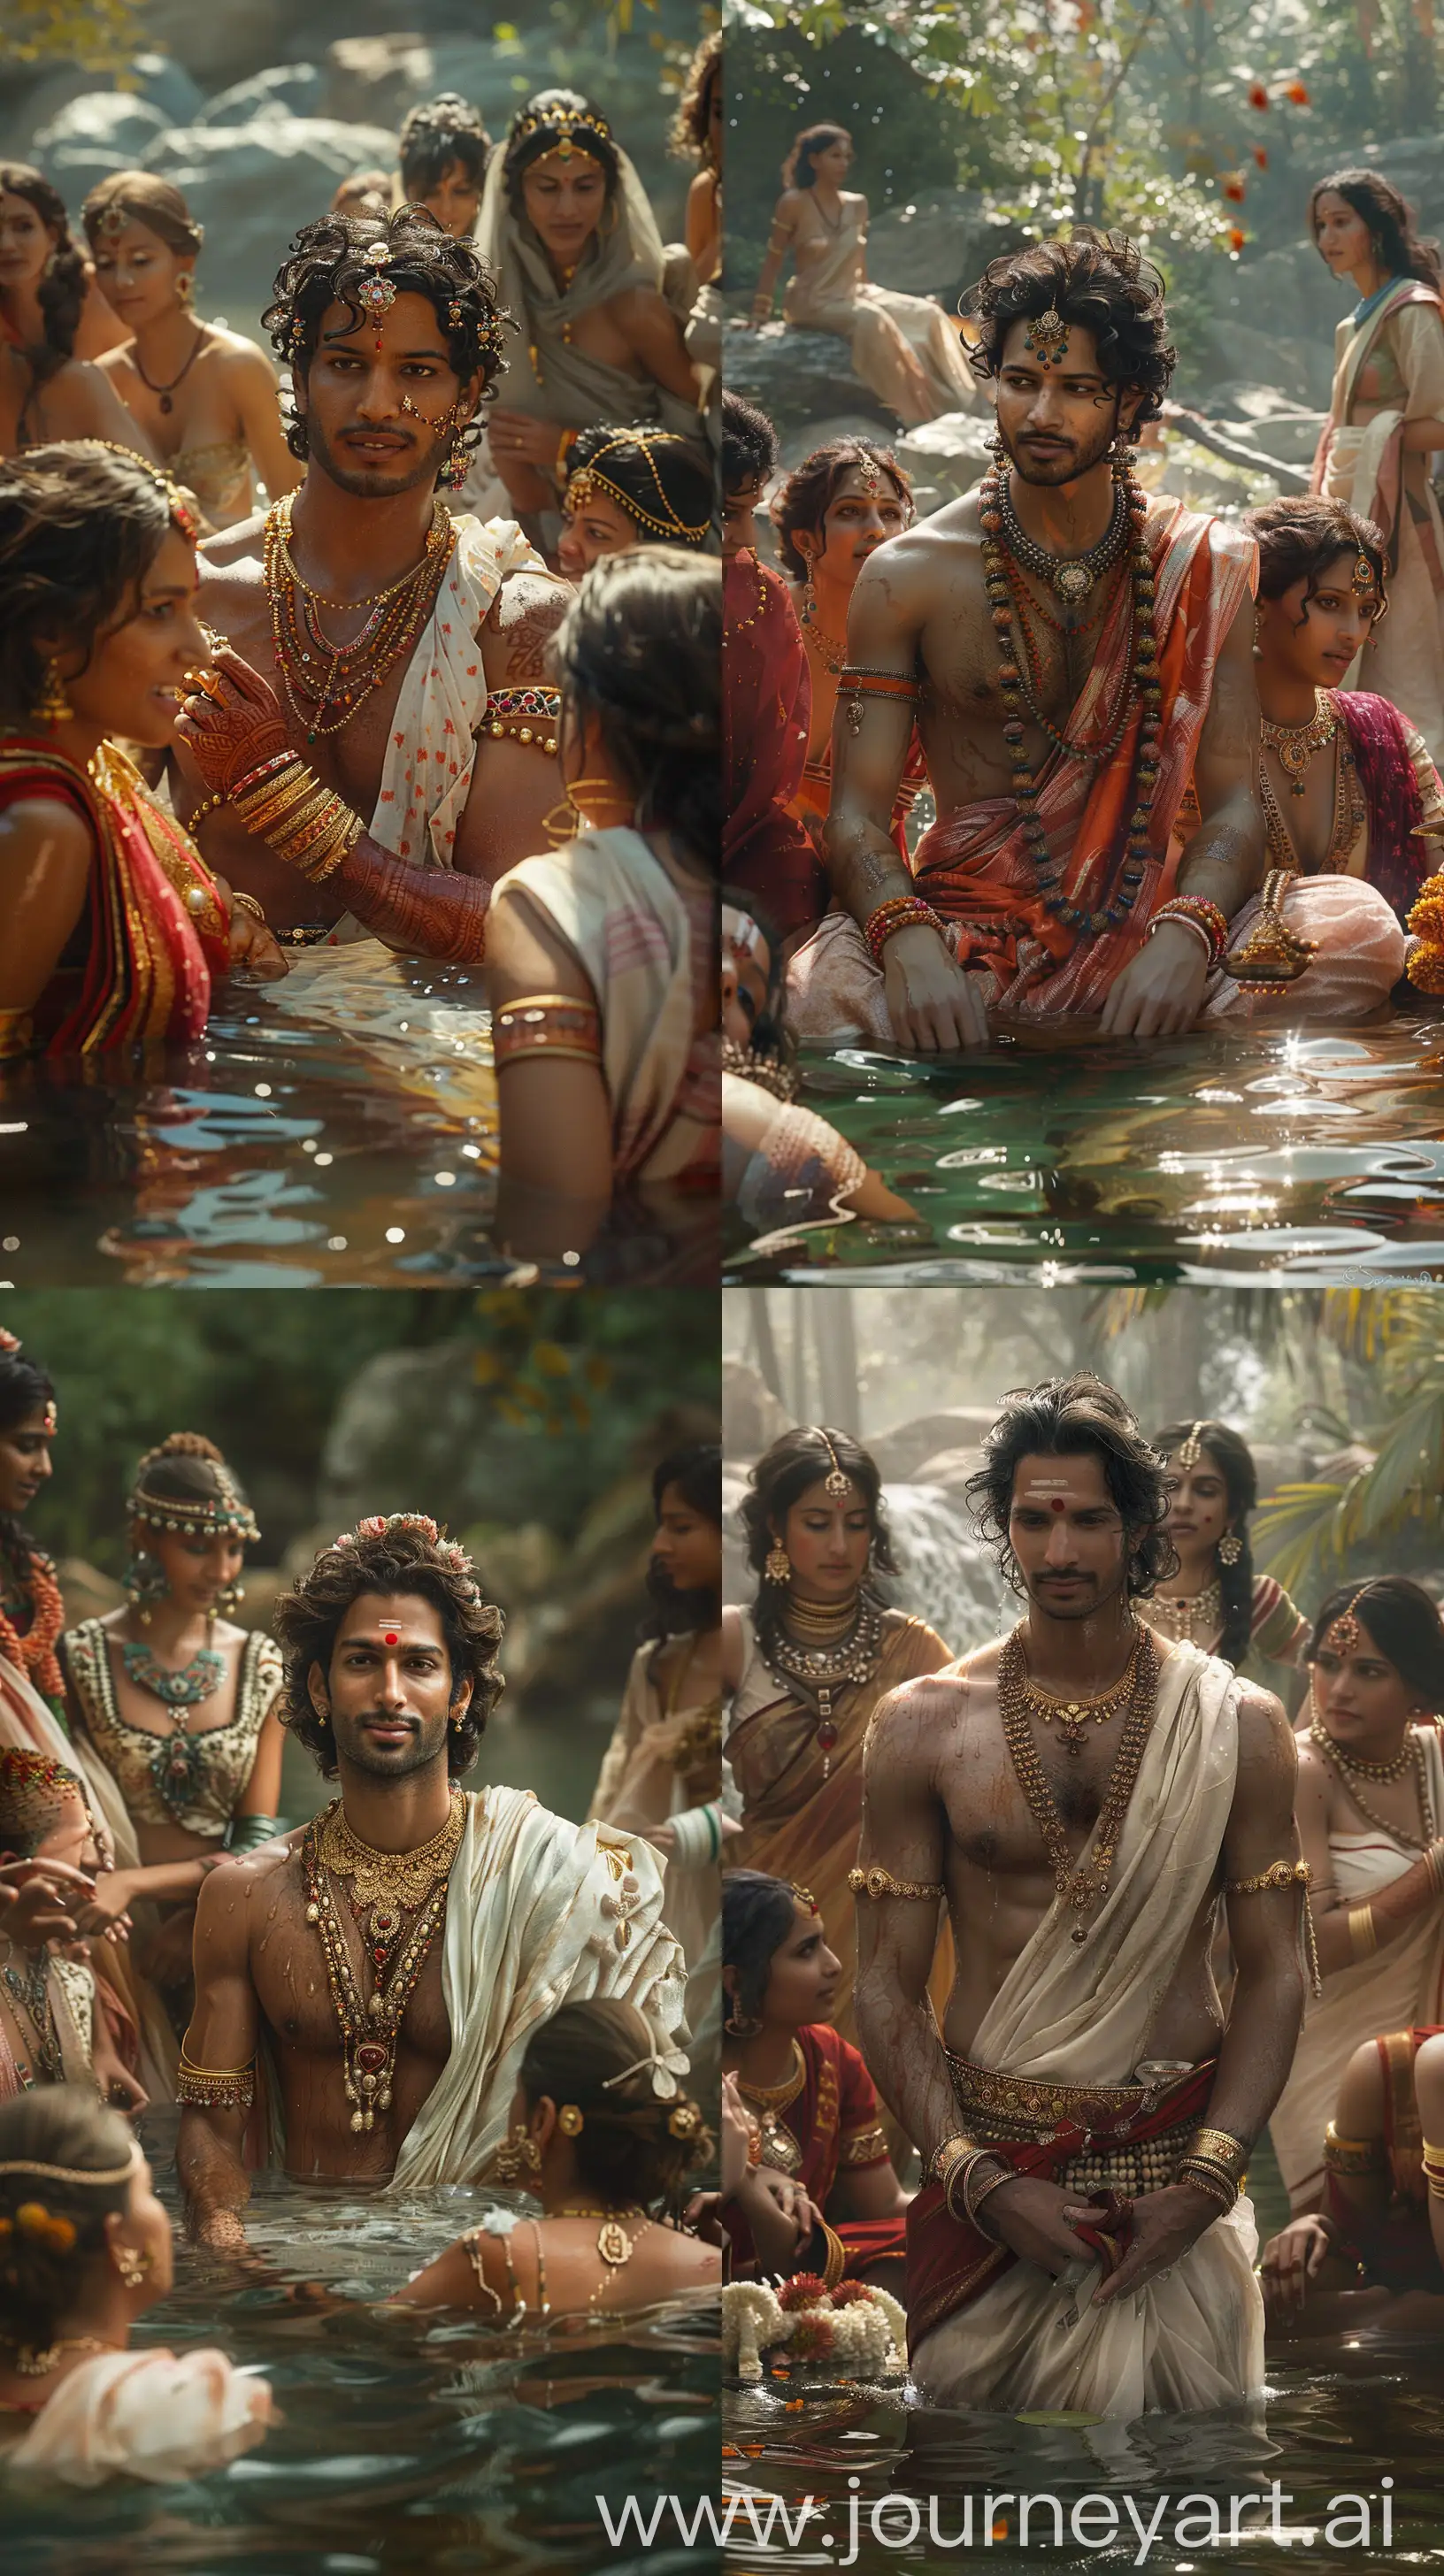 Serene-Ancient-Indian-Prince-Bathing-Surrounded-by-Playful-Women